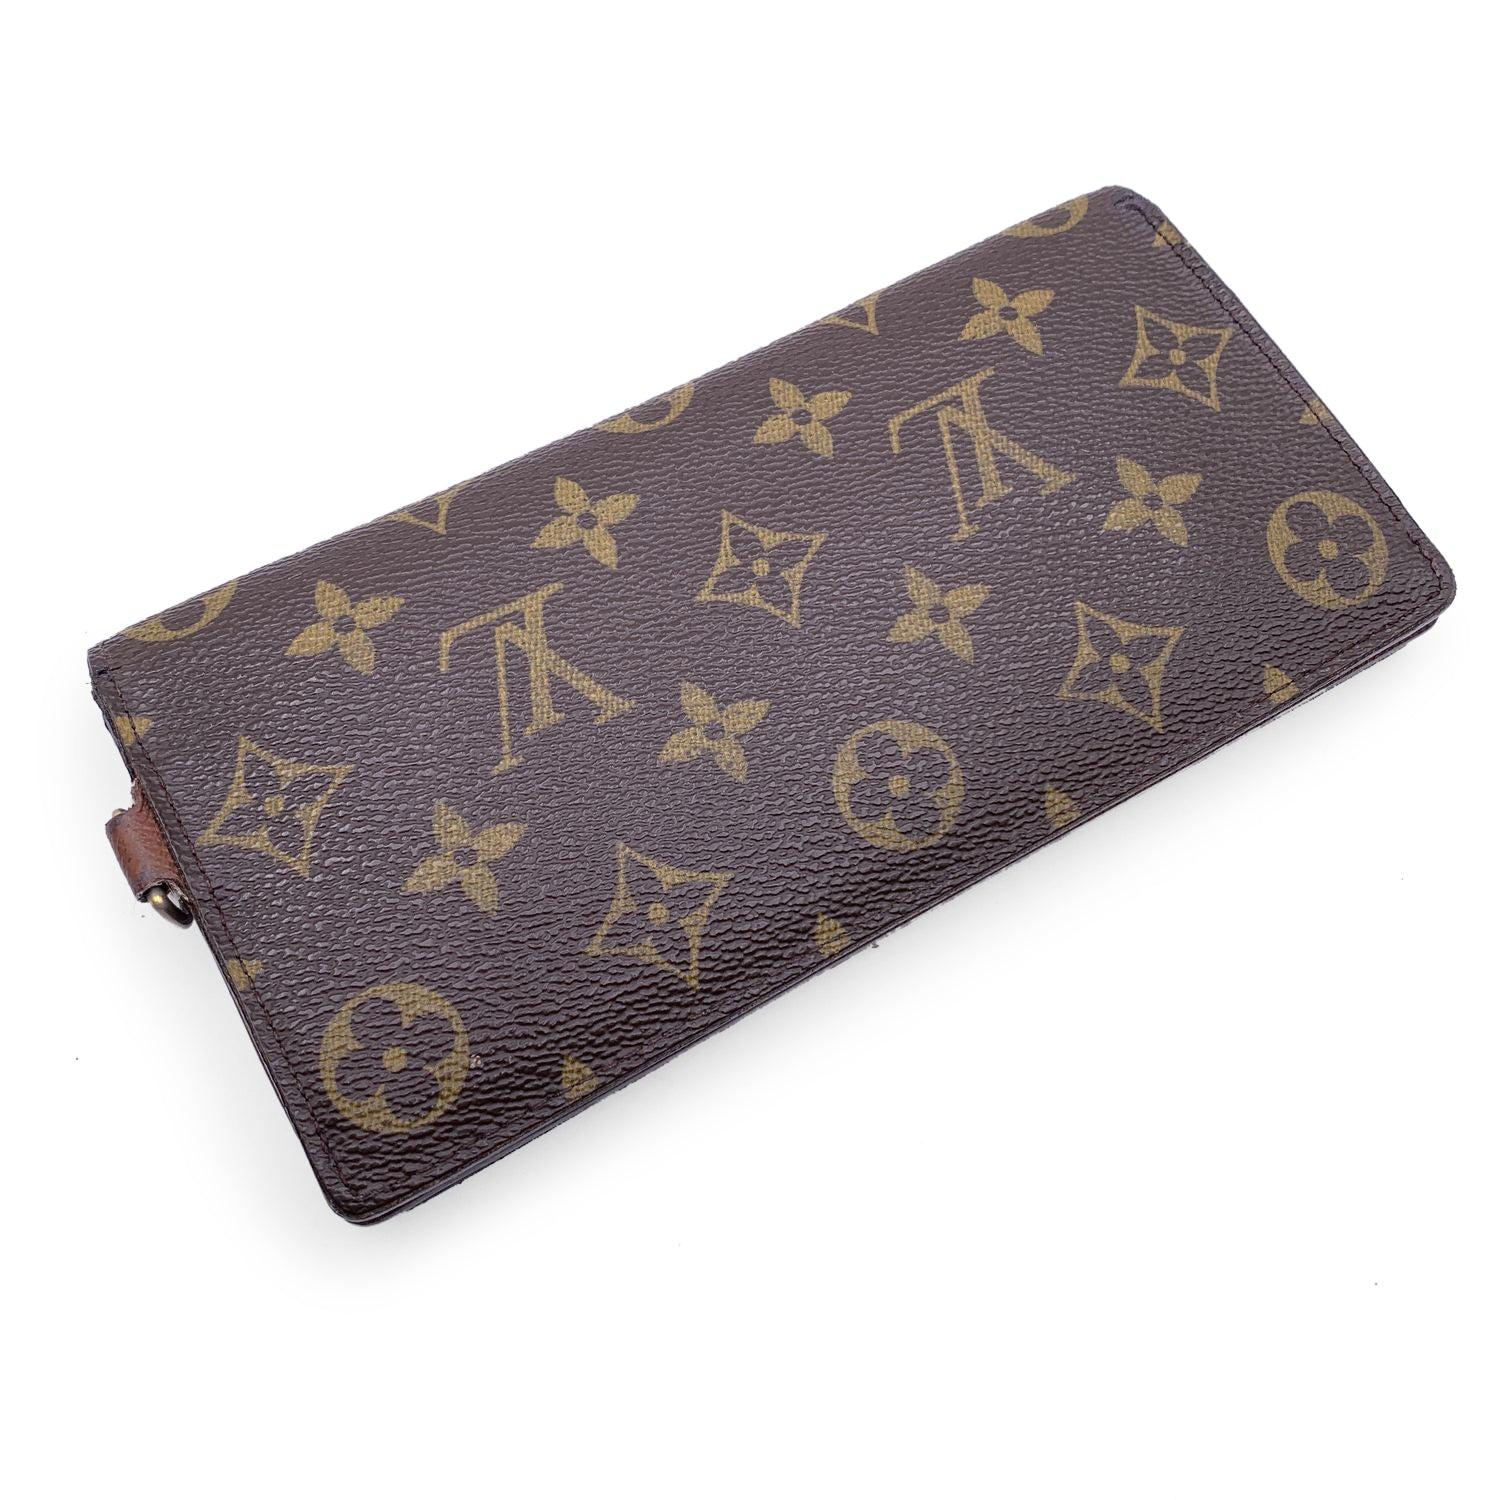 Louis Vuitton 'monogram canvas 'Accordeon' wallet Interior. Double snap button closure at front flap. Tan leather interior. The interior features 7 credit card slots, 1 zip pocket , 2 interior compartments and 2 flat pockets. D-ring at the exterior